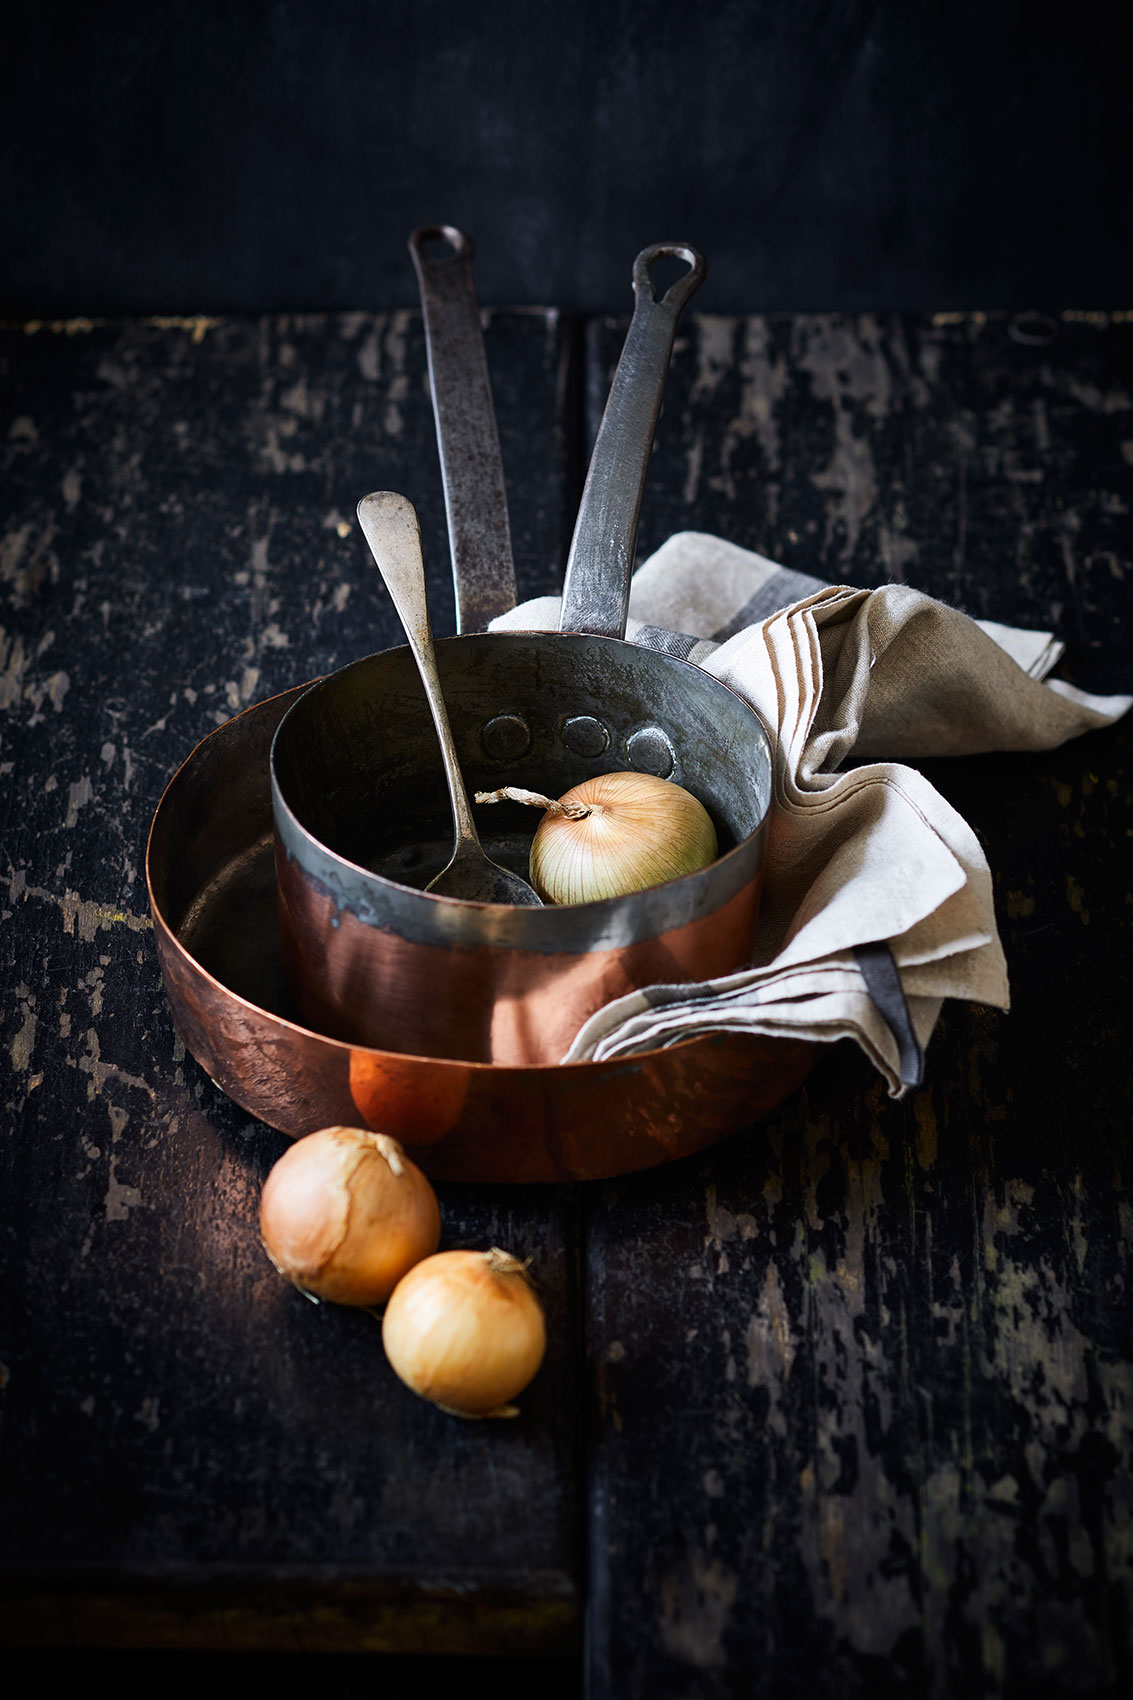 My Indian Kitchen • Copper Pots with Onions on Dark Wooden Bench • Cookbook & Editorial Food Photography